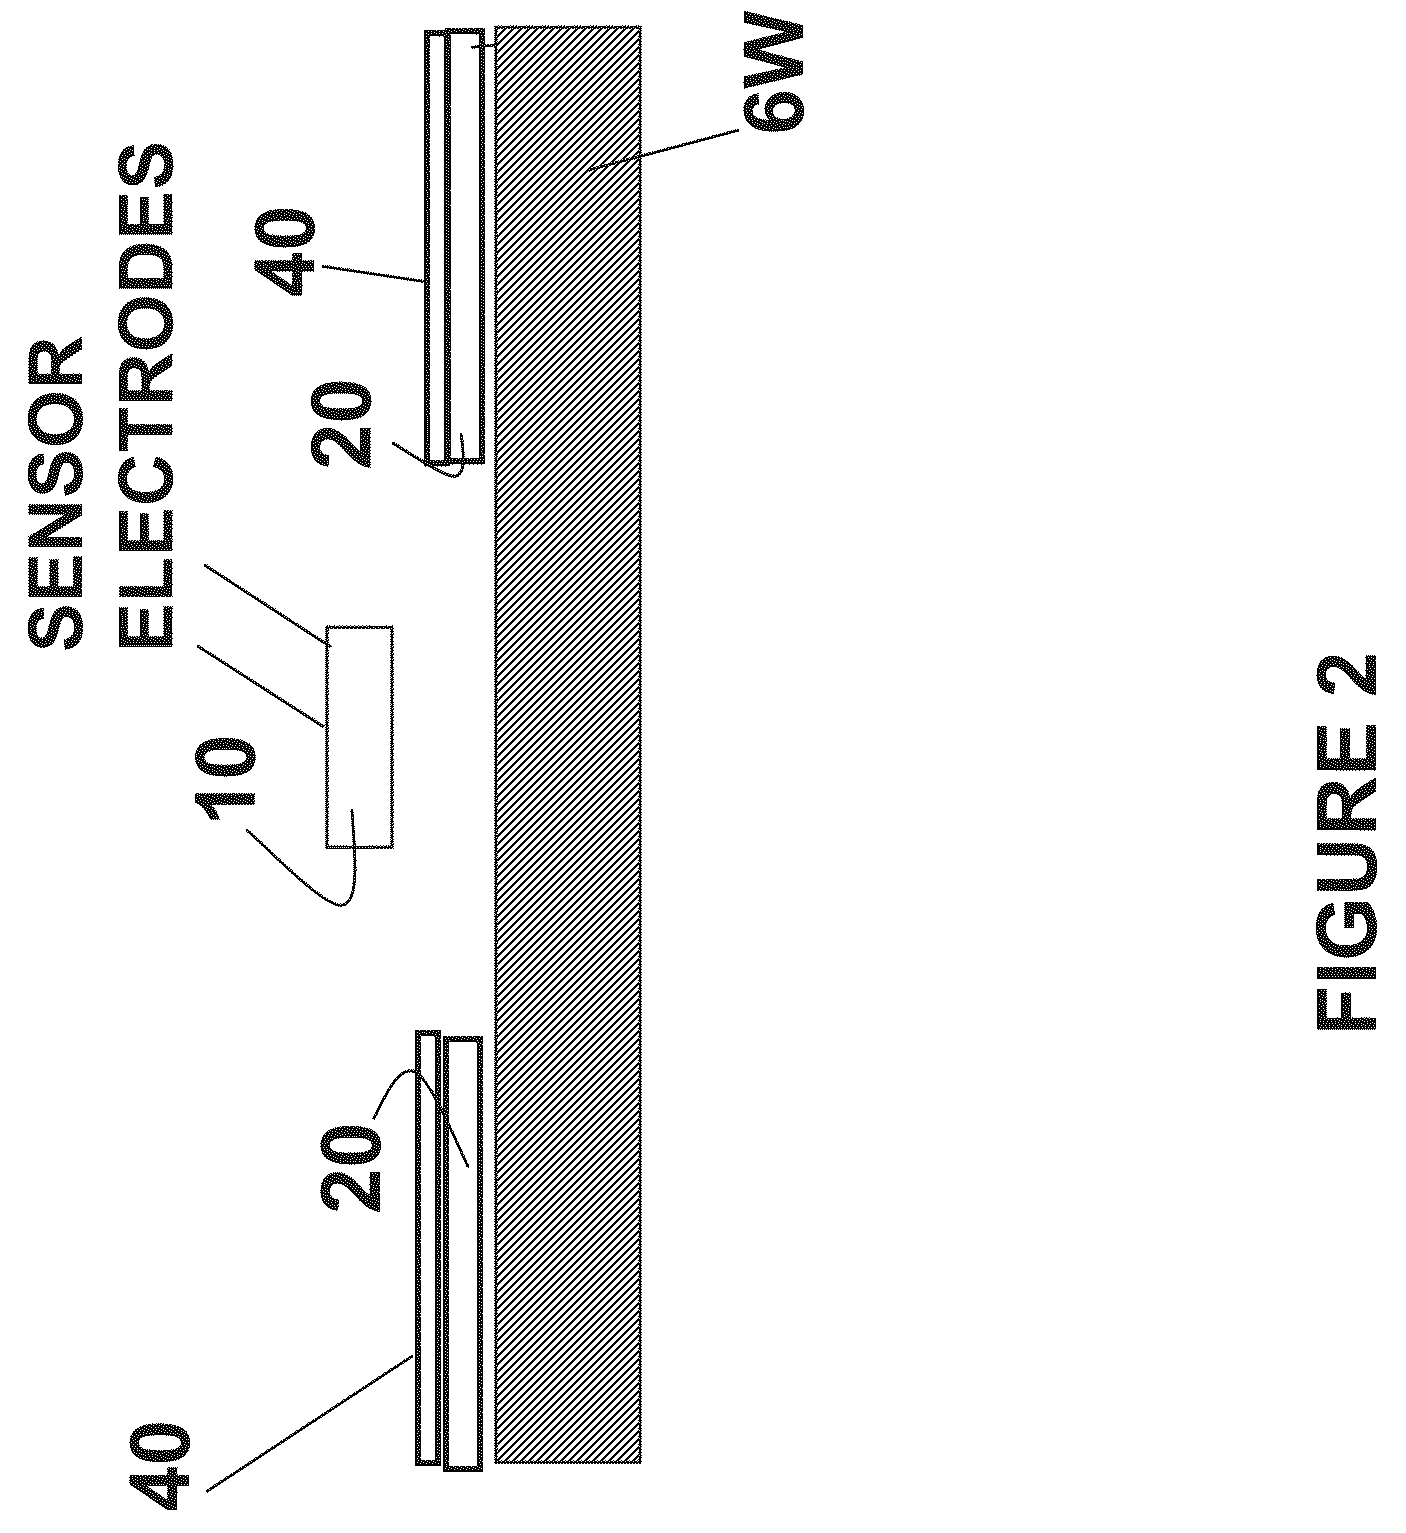 MEMS device with tandem flux concentrators and method of modulating flux